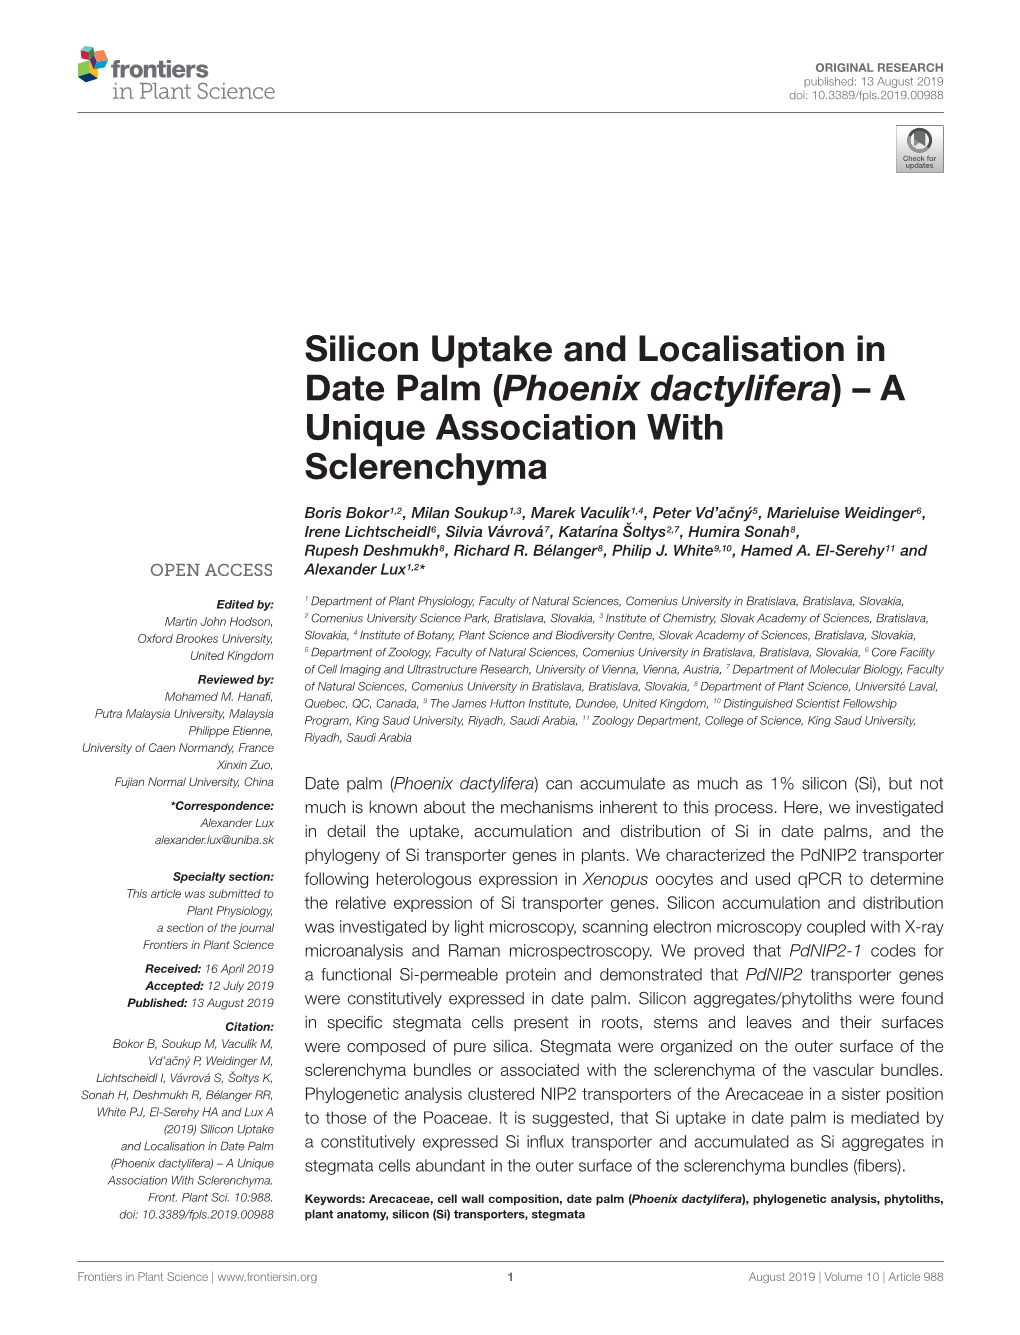 Silicon Uptake and Localisation in Date Palm (Phoenix Dactylifera)–A Unique Association with Sclerenchyma